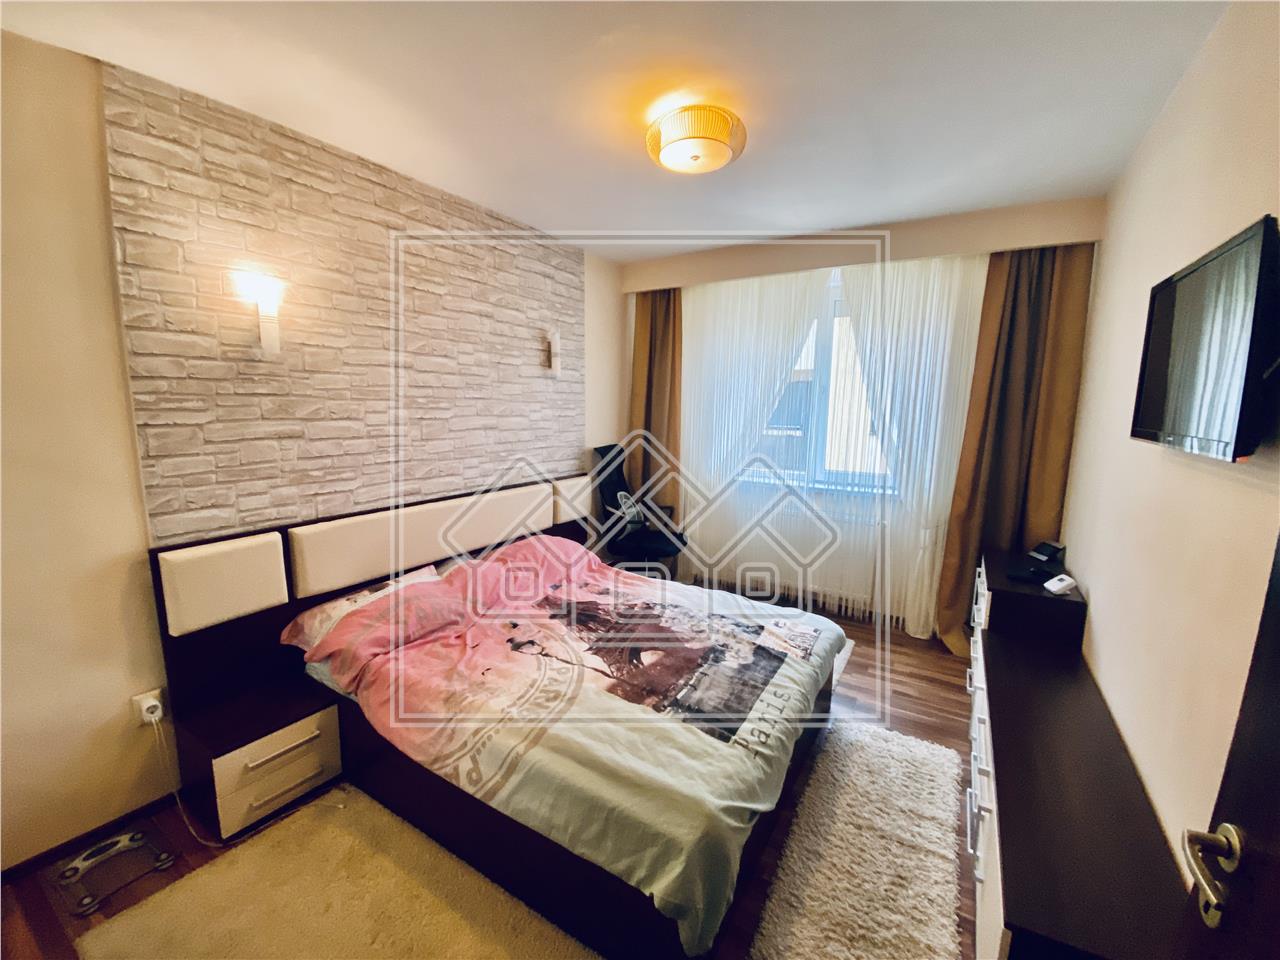 Apartment for sale in Sibiu - 3 rooms and balcony - Rahovei area